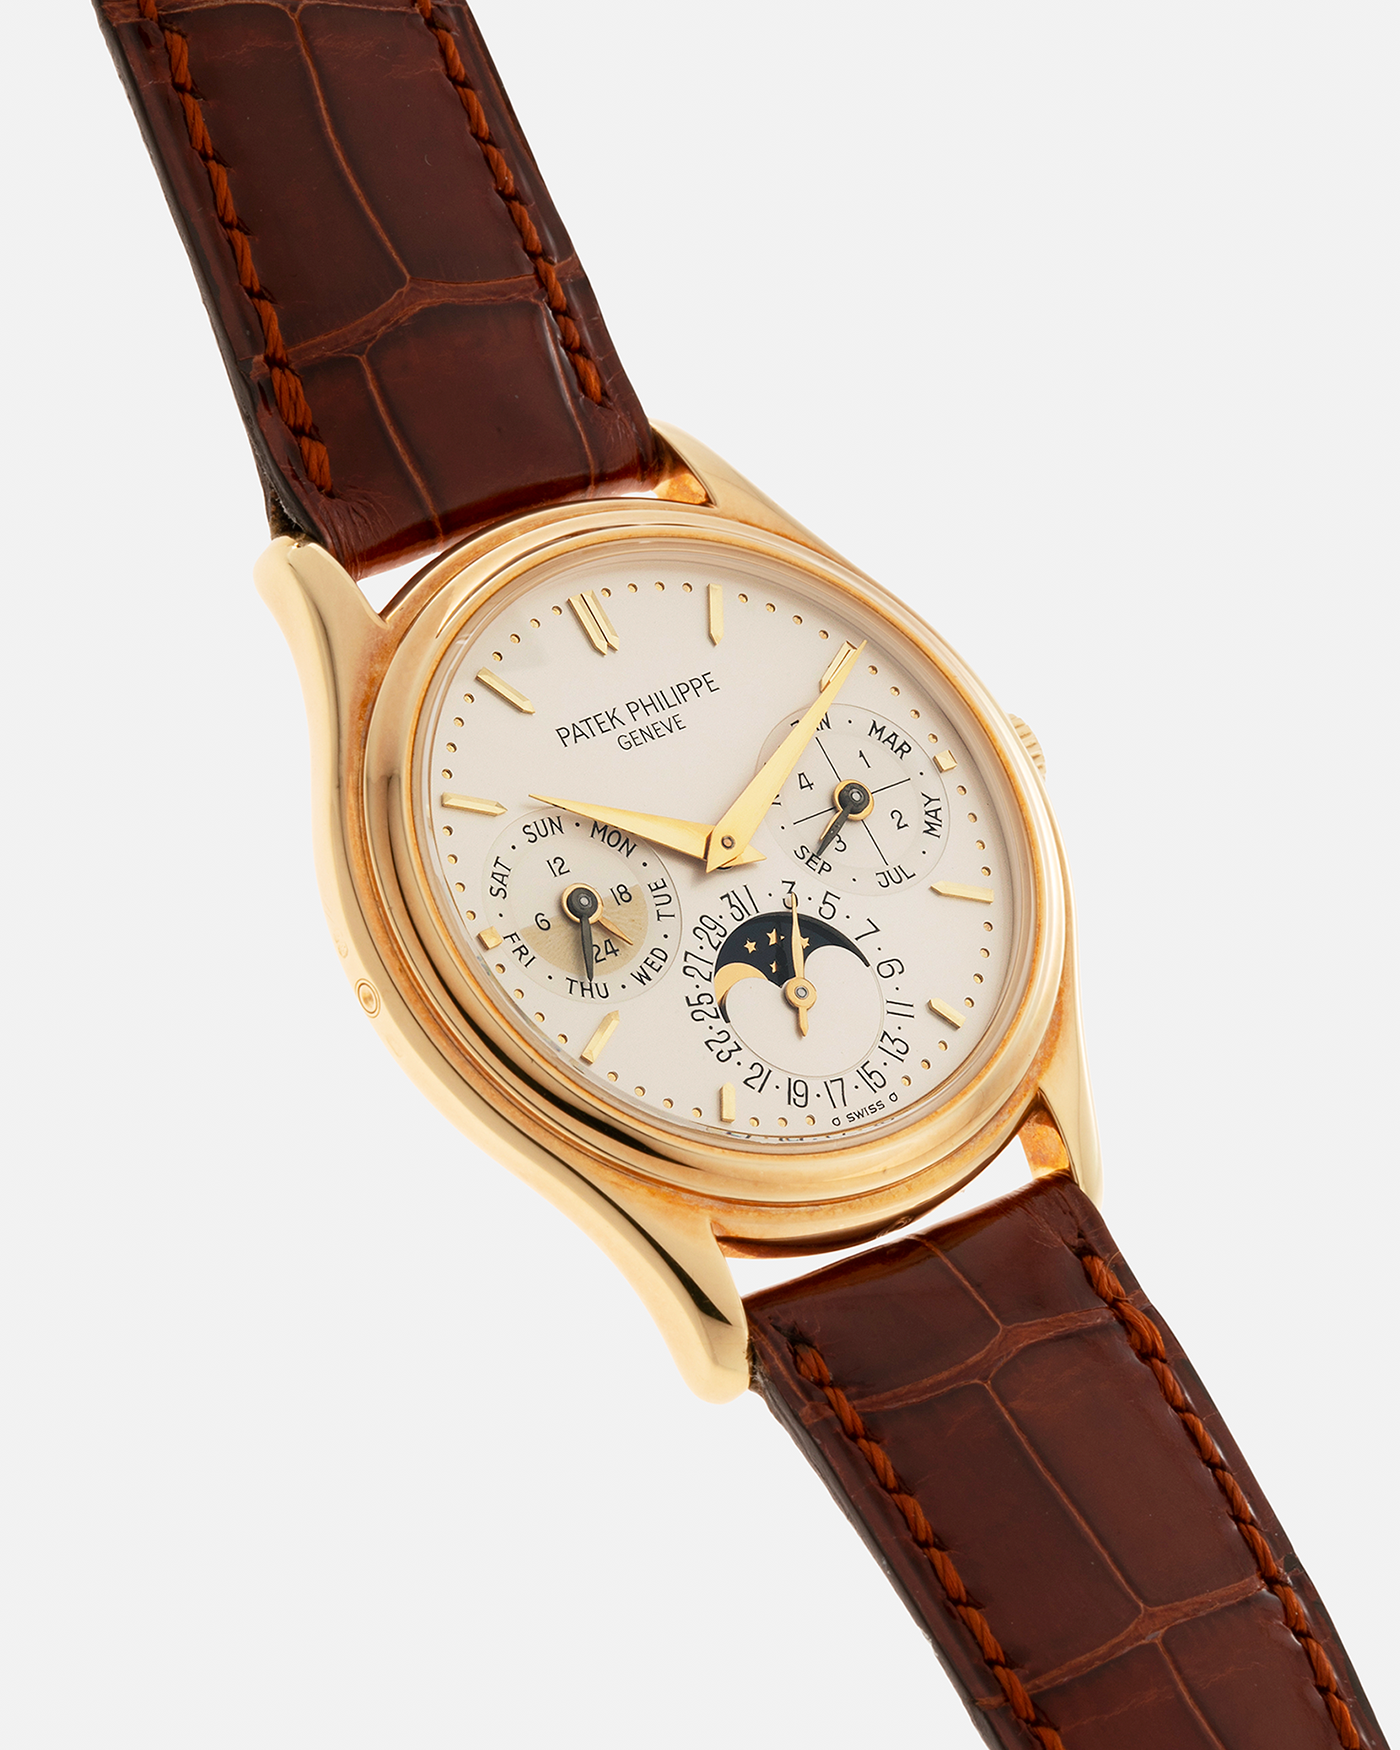 Brand: Patek Philippe Year: 1990’s Model: Perpetual Calendar Reference Number: 3940J Material: 18-carat Yellow Gold Movement: Patek Philippe Cal. 240Q, Self-Winding Micro-Rotor Case Diameter: 36mm Strap: Patek Philippe Chestnut Brown Alligator Strap with Signed 18-carat Yellow Gold Tang Buckle